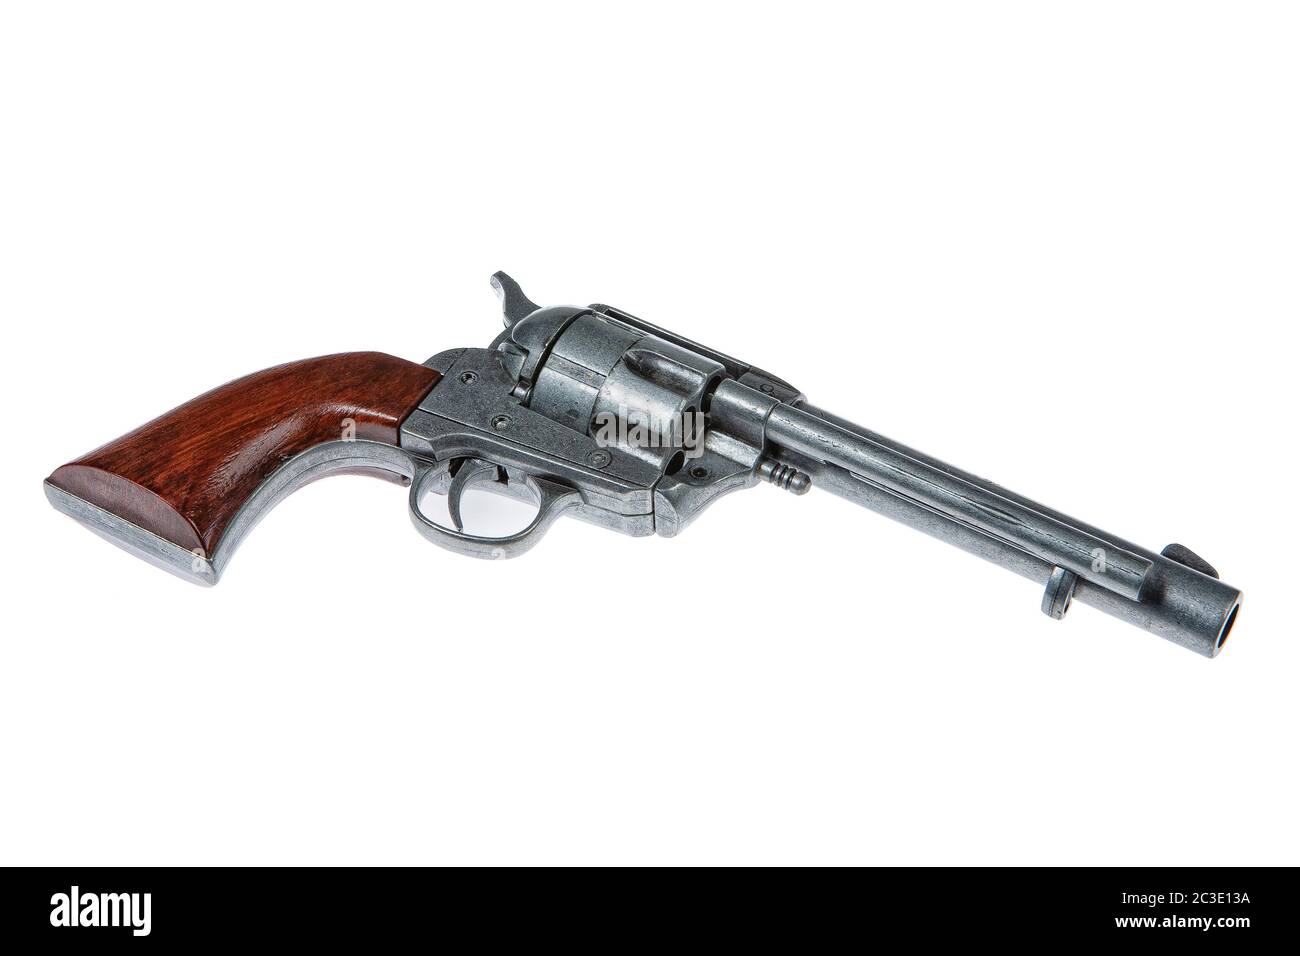 Old Army Single Action Revolver Stock Photo